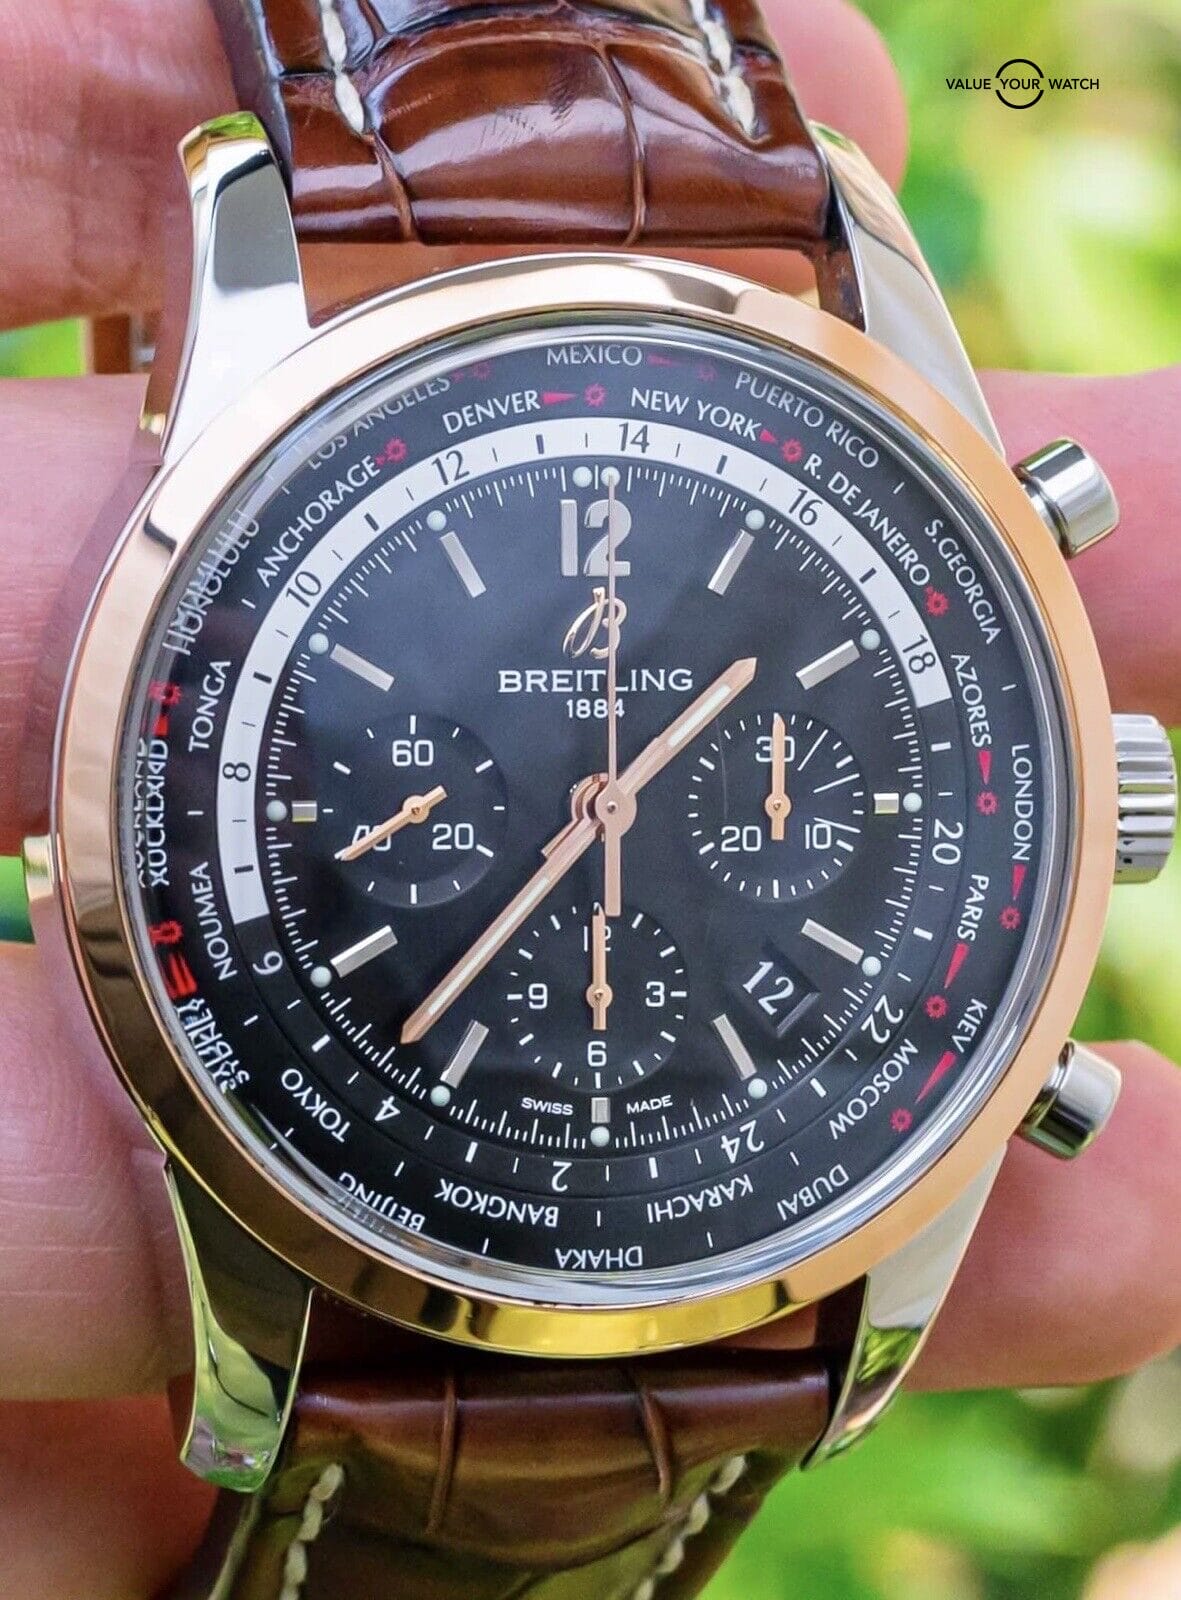 Breitling Transocean Chronograph Unitime for Rs.330,186 for sale